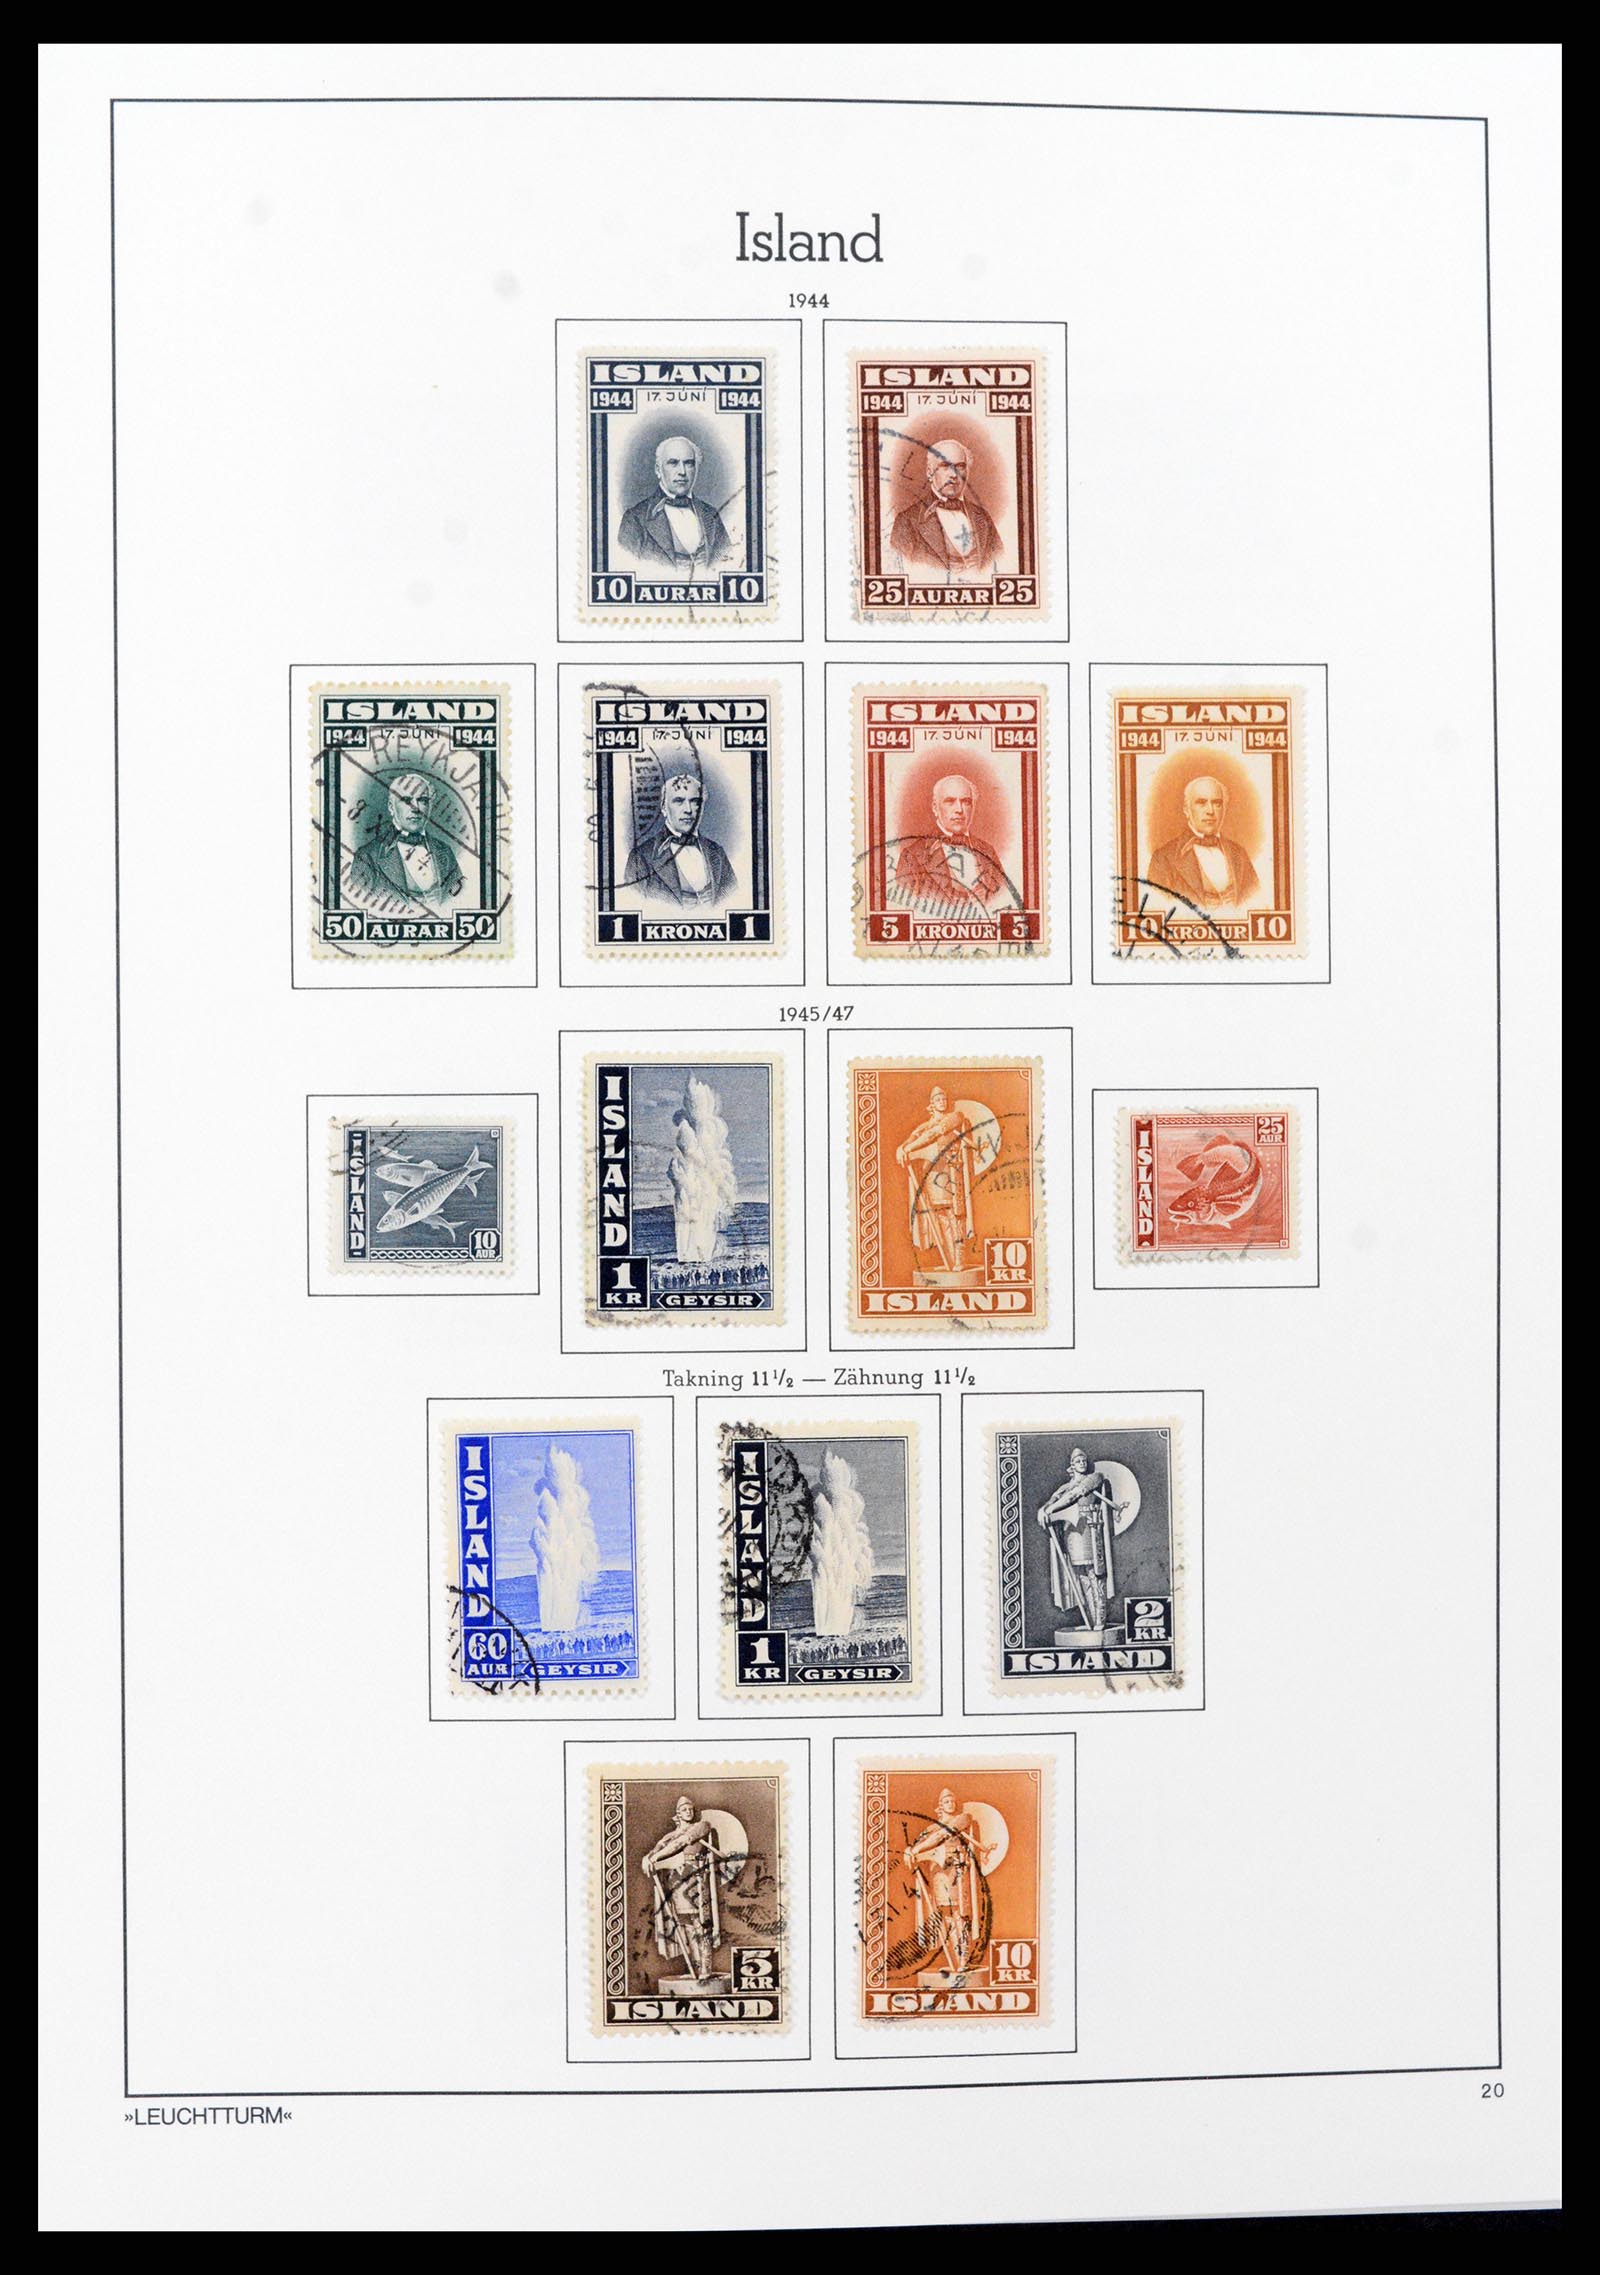 37401 020 - Stamp collection 37401 Iceland 1873-2002.